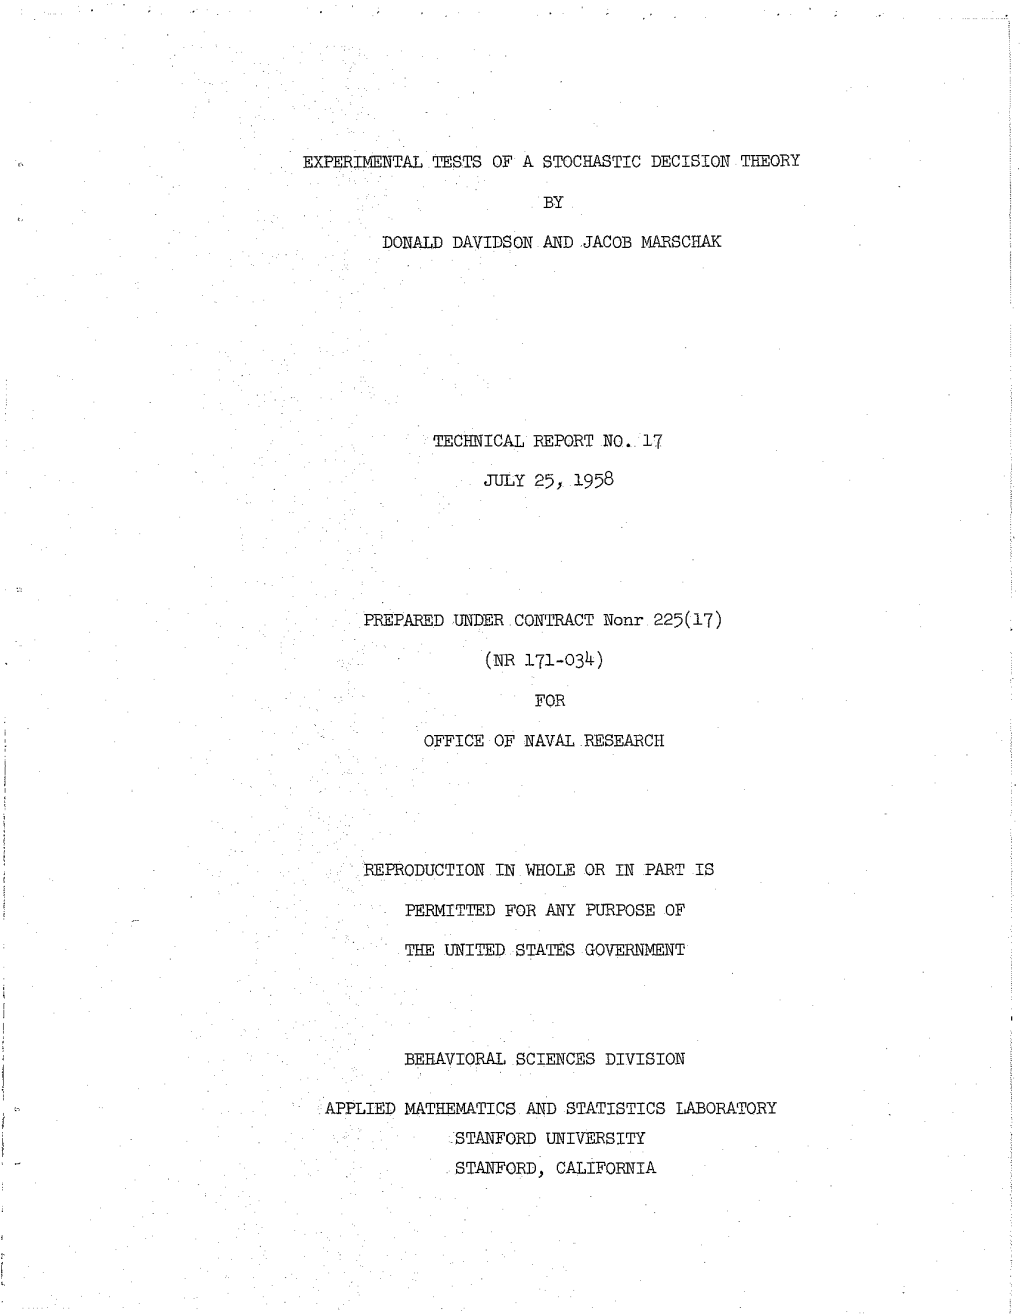 Experimental Tests of a Stochastic Decision Theory by Donald Davidson and Jacob Marschak Technical Report No. 17 July 25, 1958 P